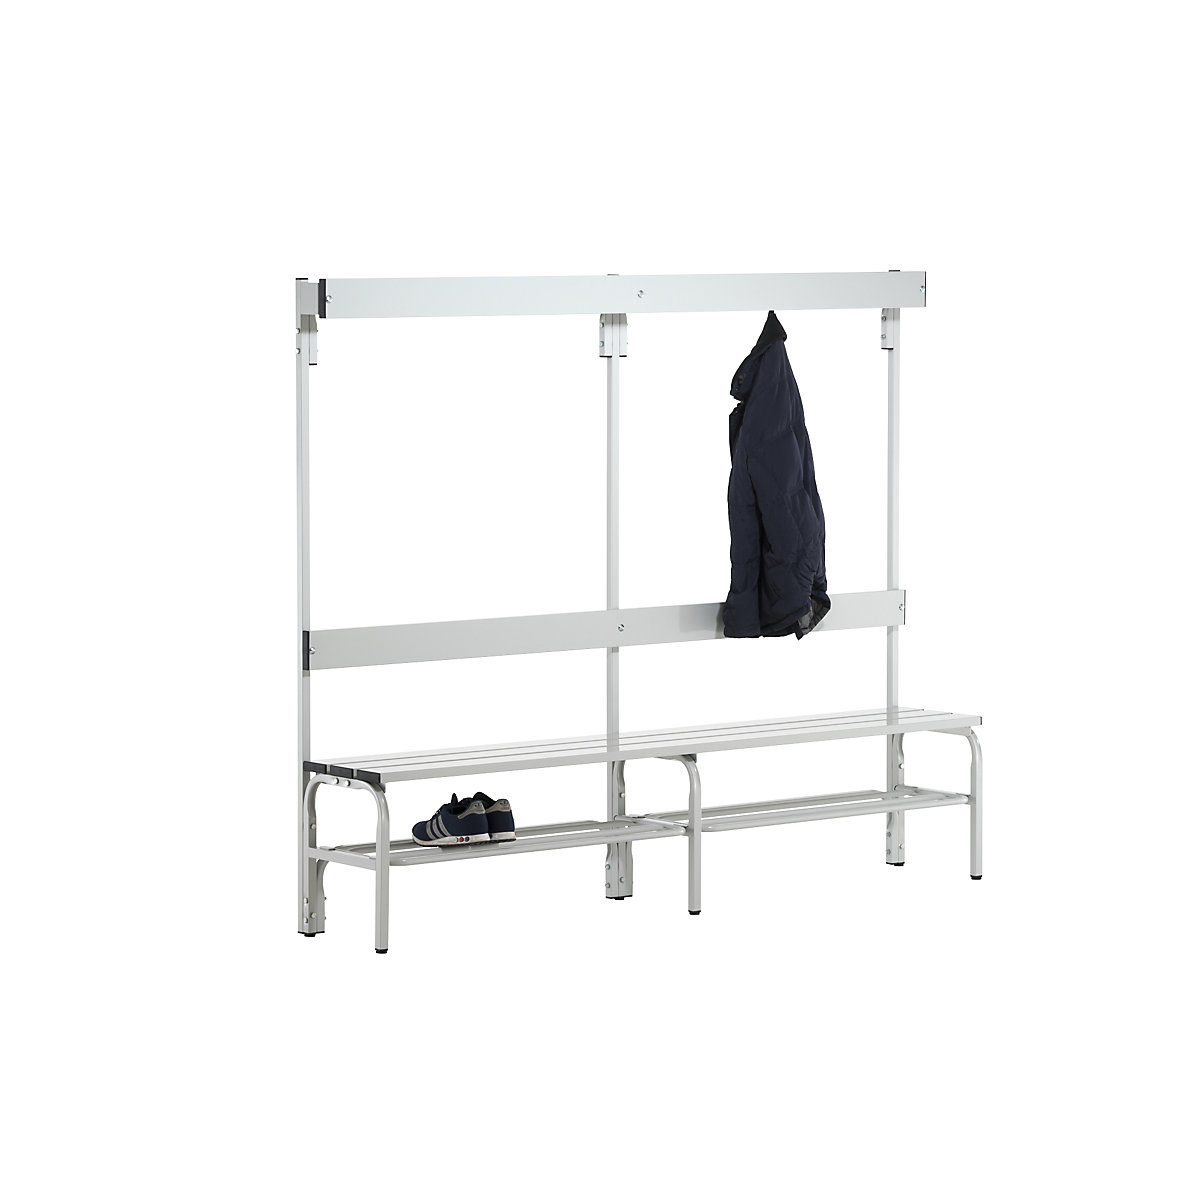 Changing room bench made of stainless steel – Sypro (Product illustration 12)-11